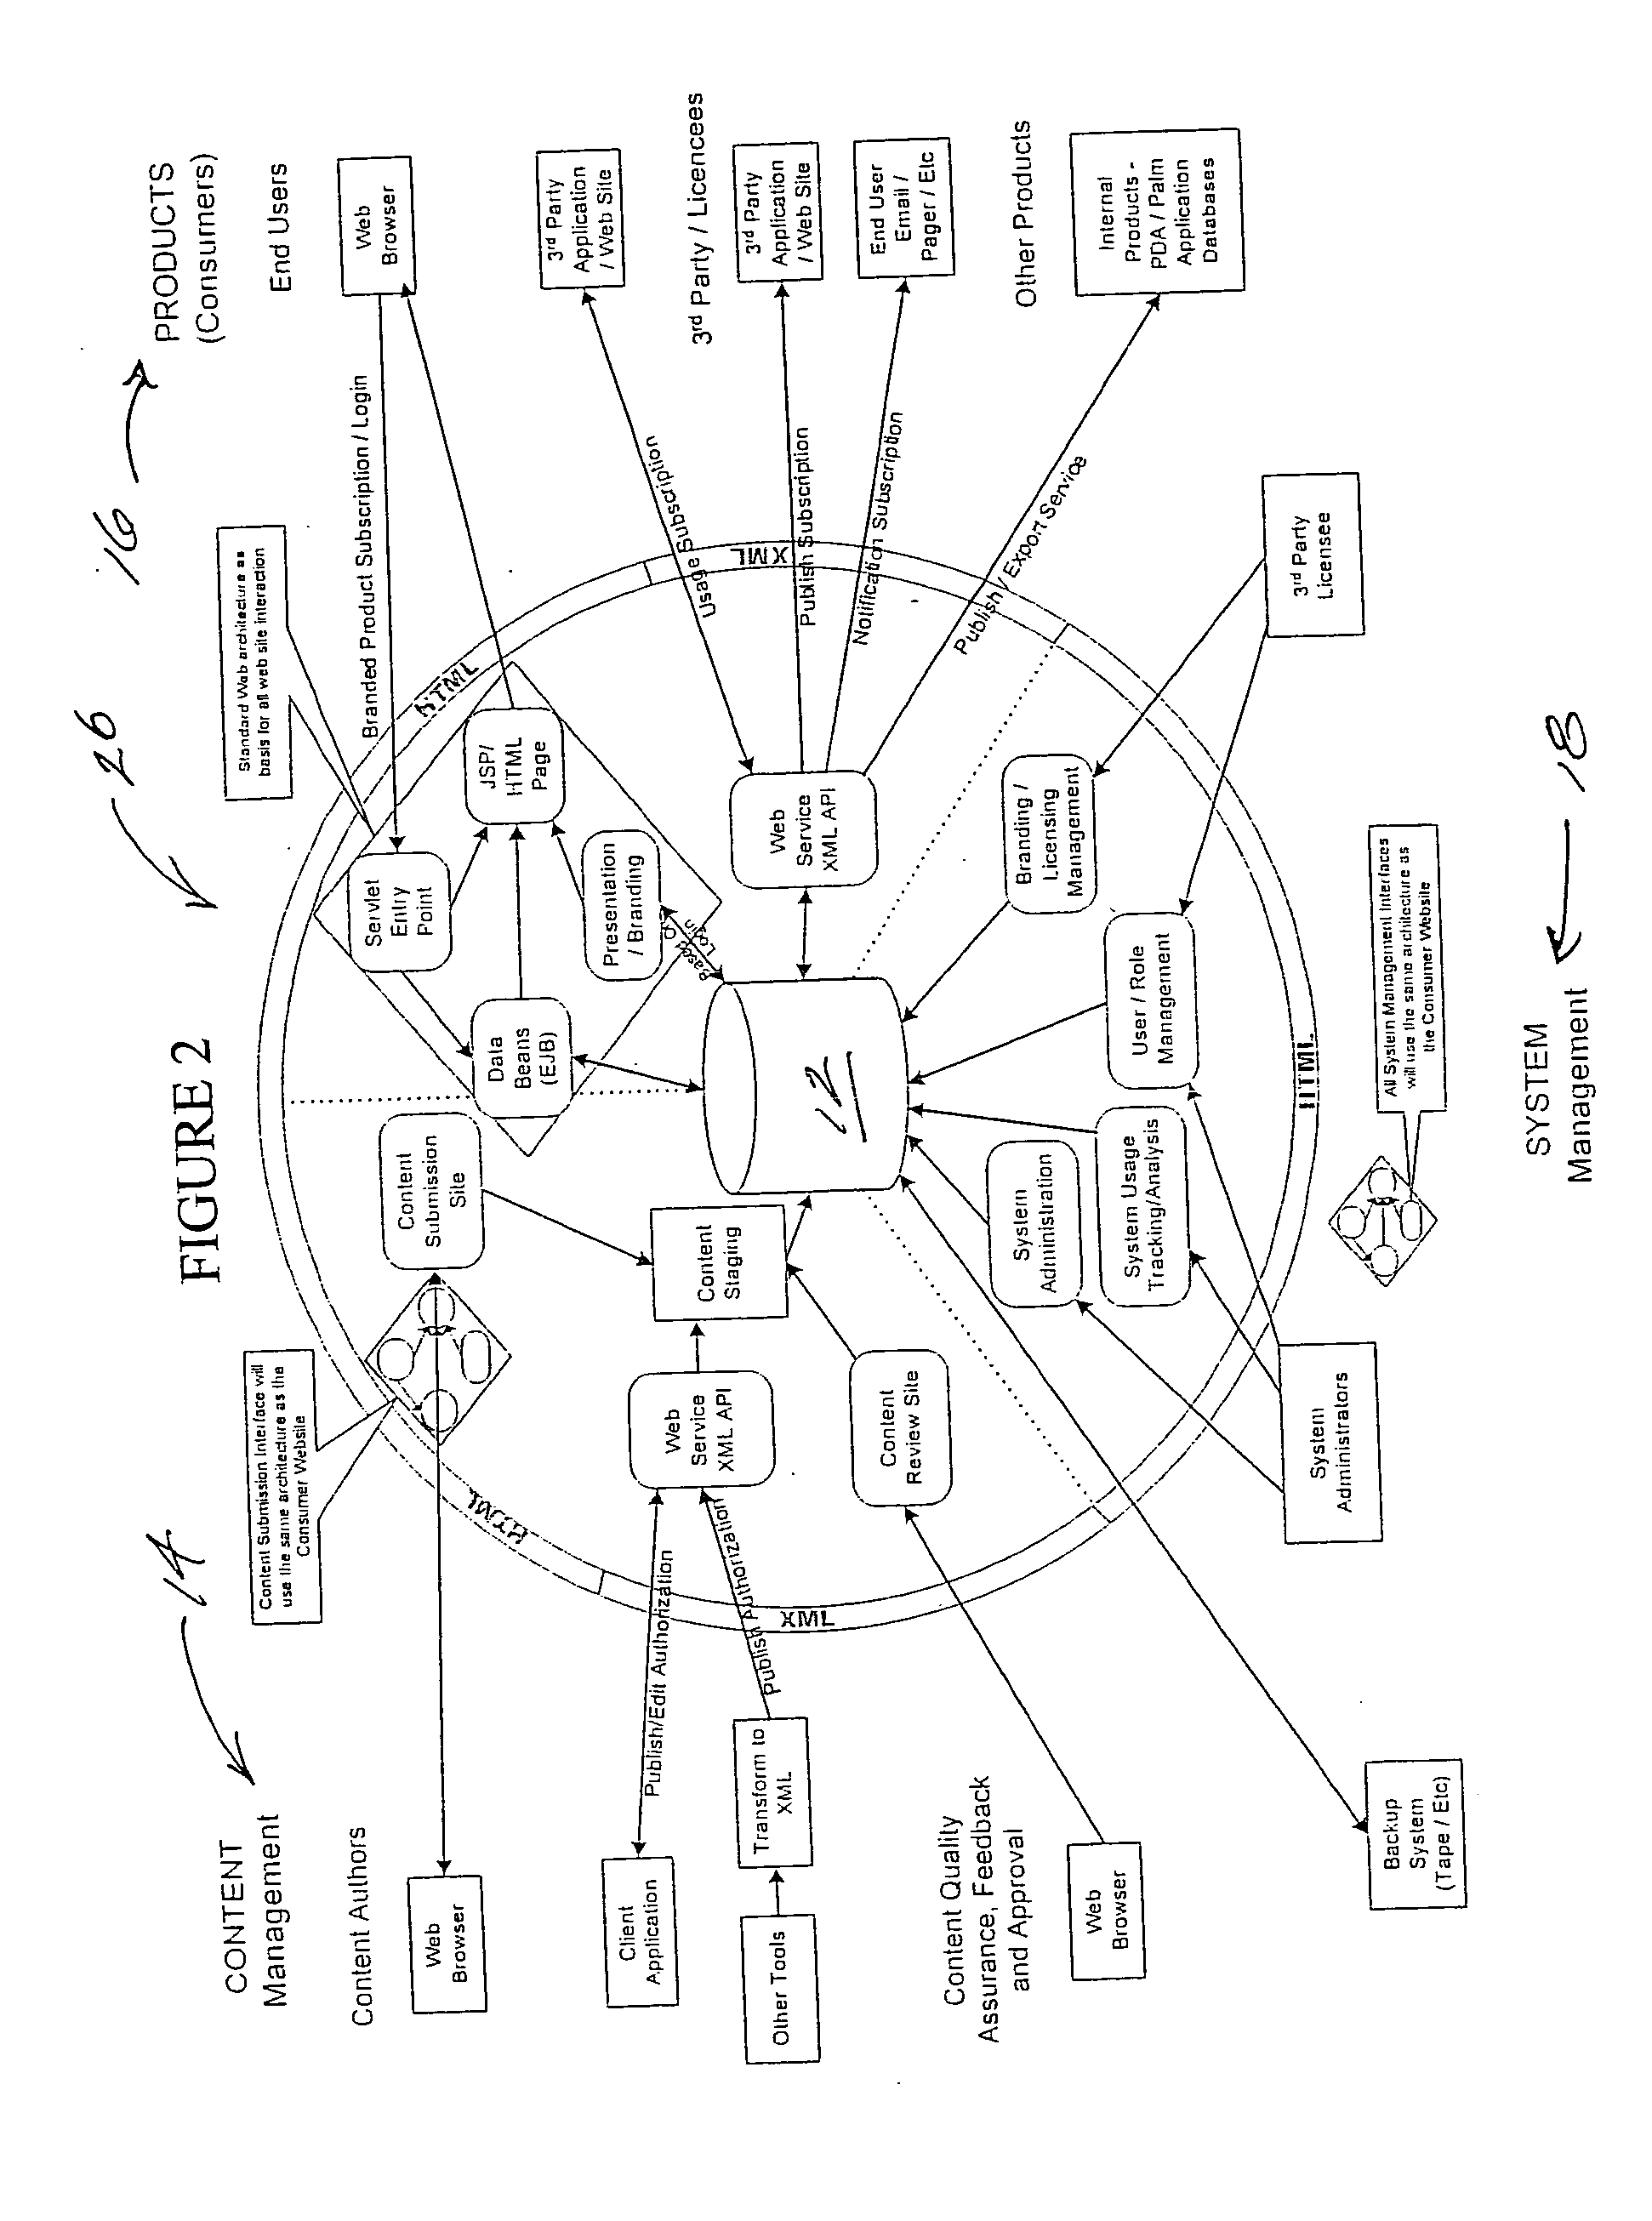 Electronic clinical reference and education system and method of use